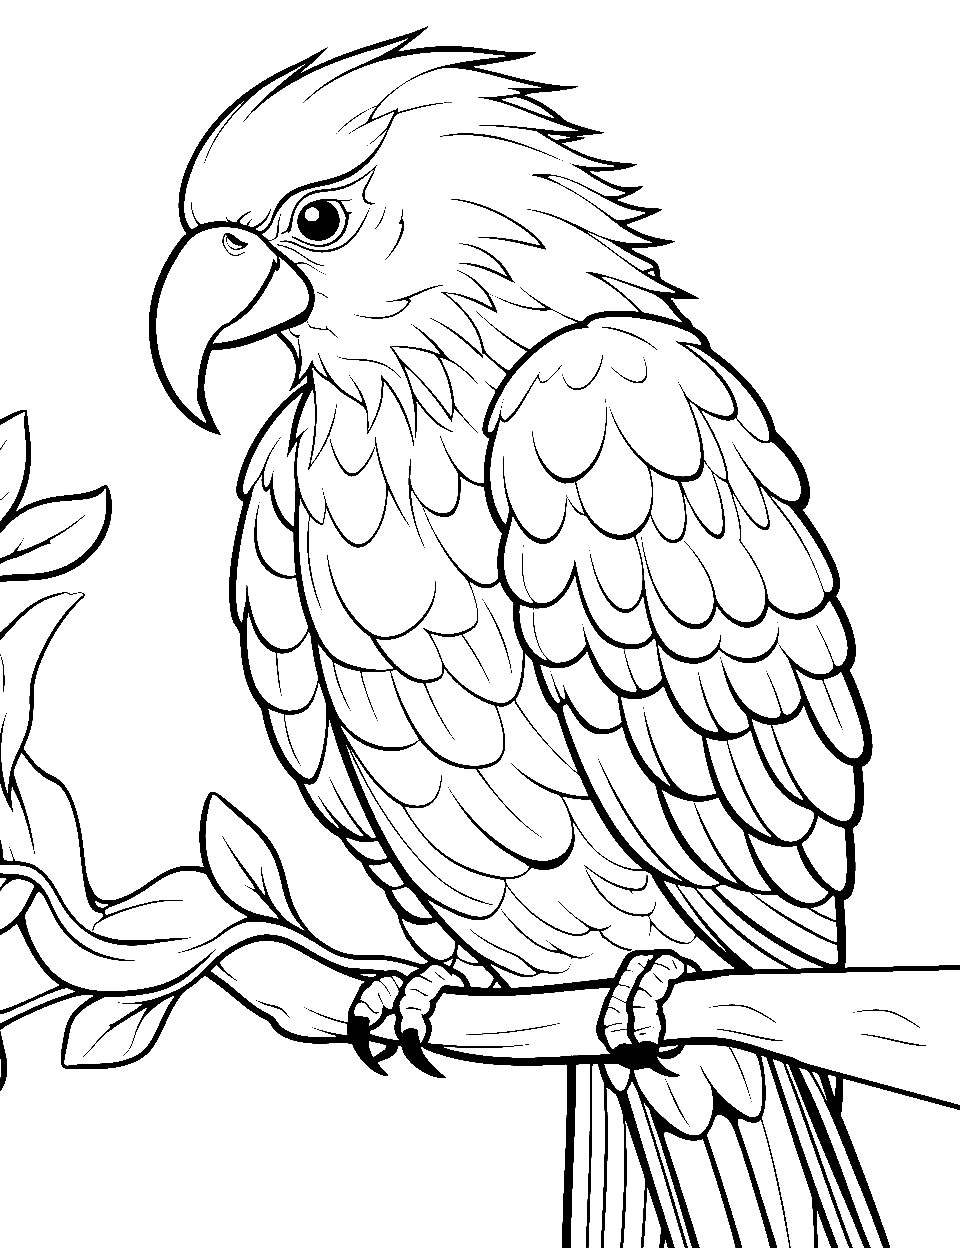 Macaw's Rainbow Plumage Coloring Page - A detailed macaw ready to get painted vivid colors on its feathers.